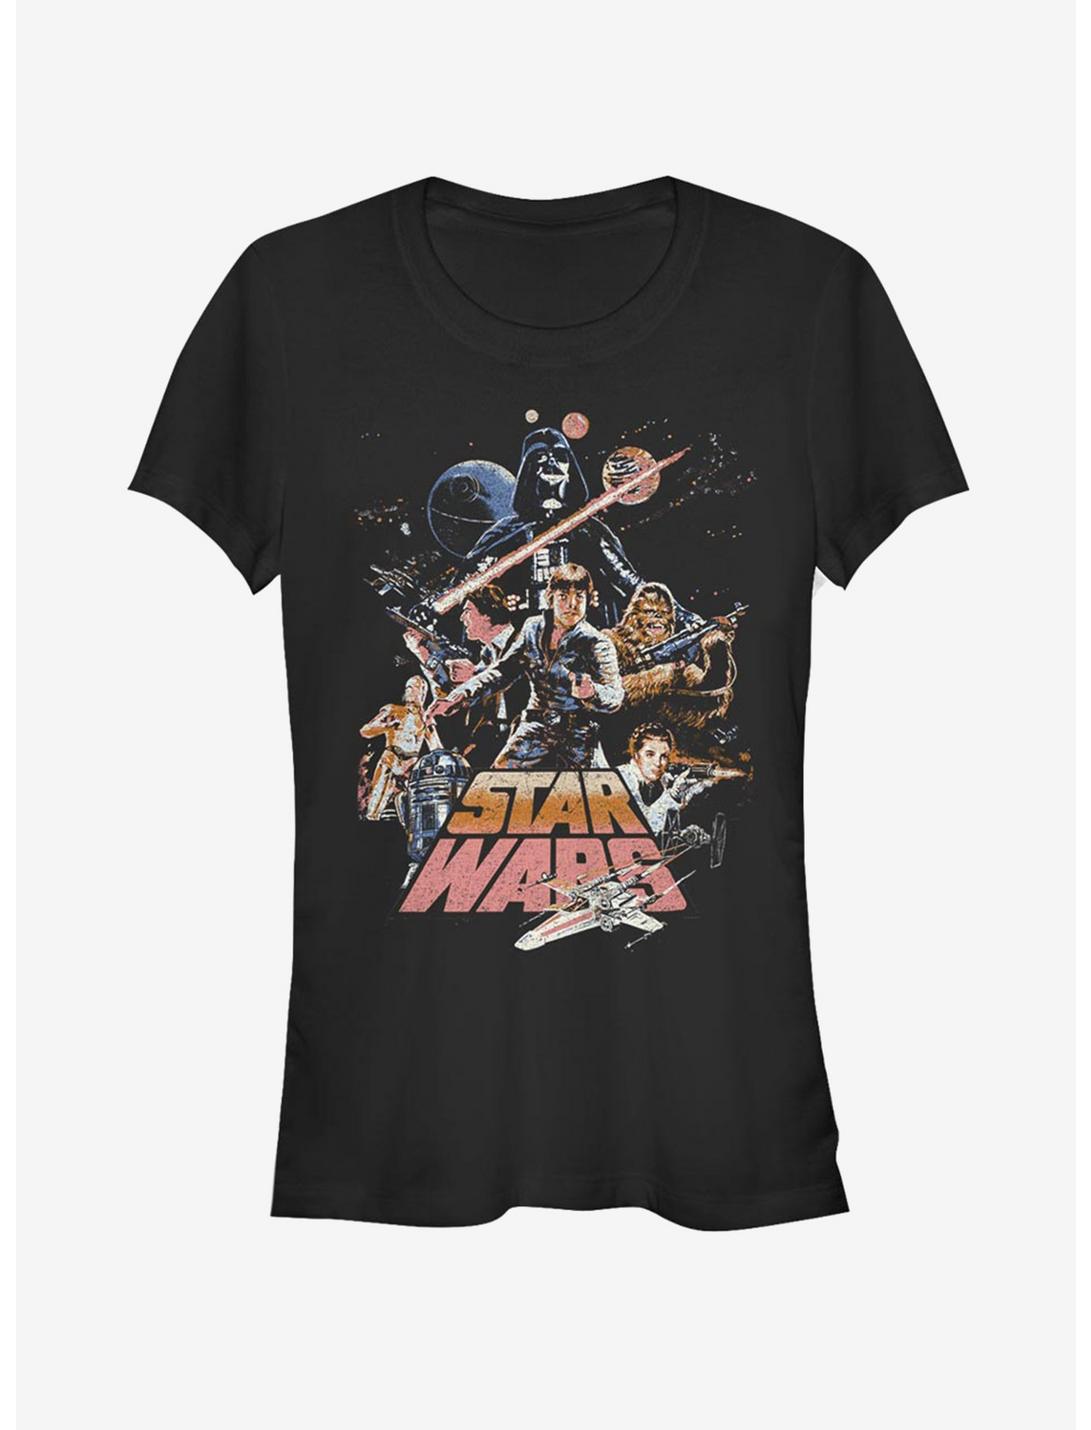 Star Wars Stand And Fight Girls T-Shirt, BLACK, hi-res